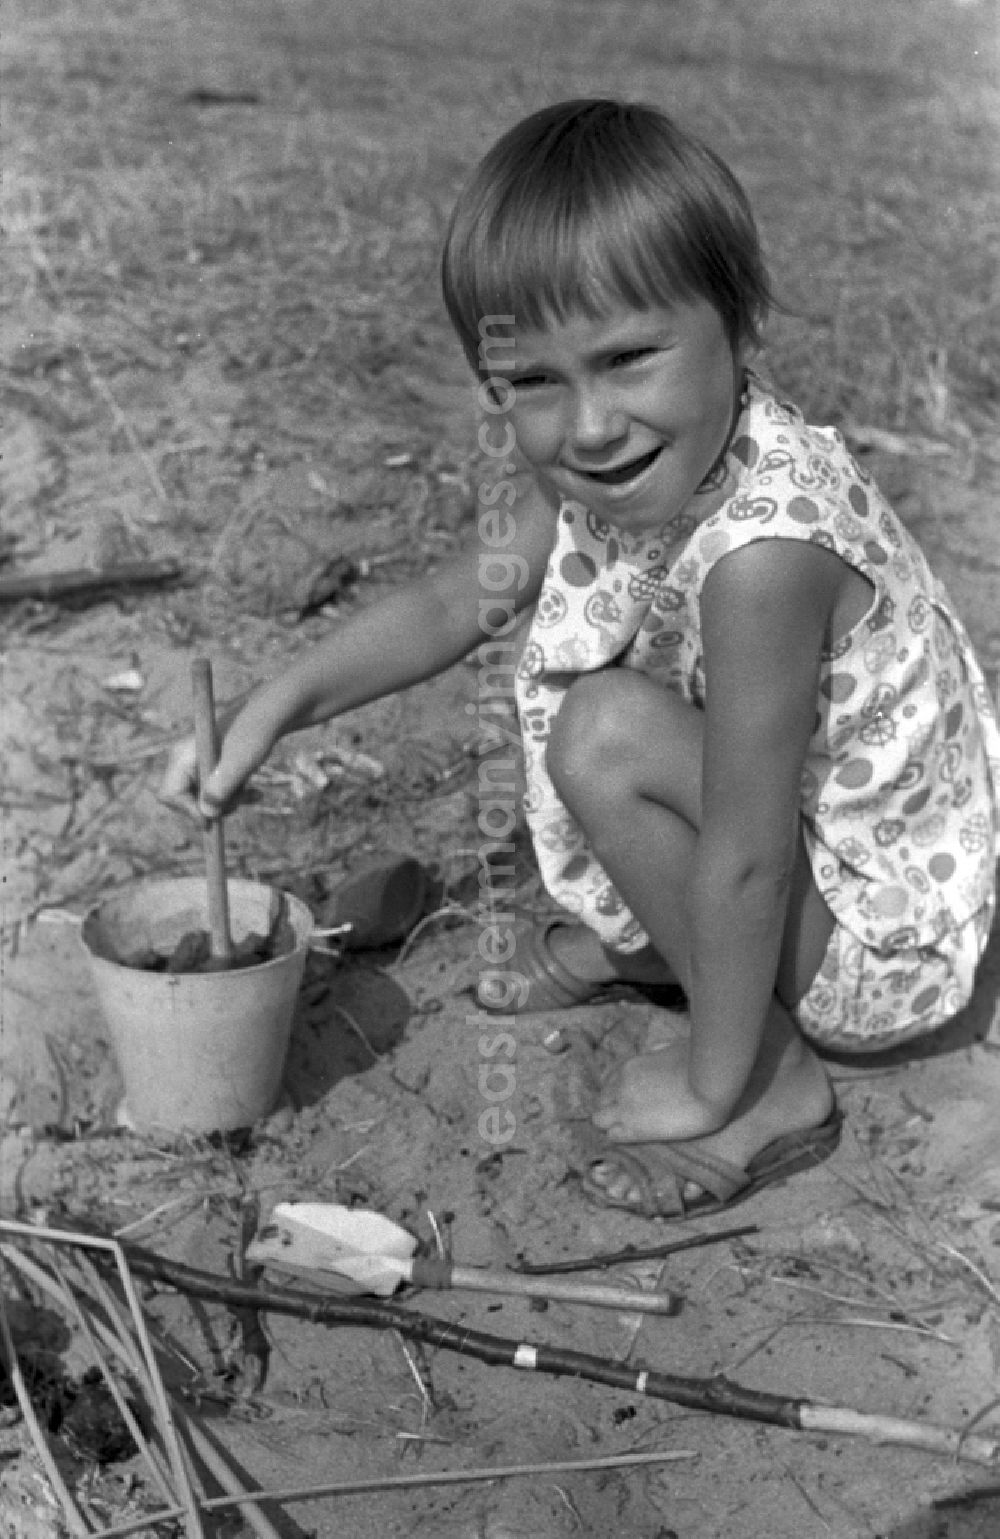 Neuruppin OT Stendenitz: A small child playing with a bucket in the sand in Brandenburg. Family camping holidays at Rottstielfließ on Tornowsee in Brandenburg